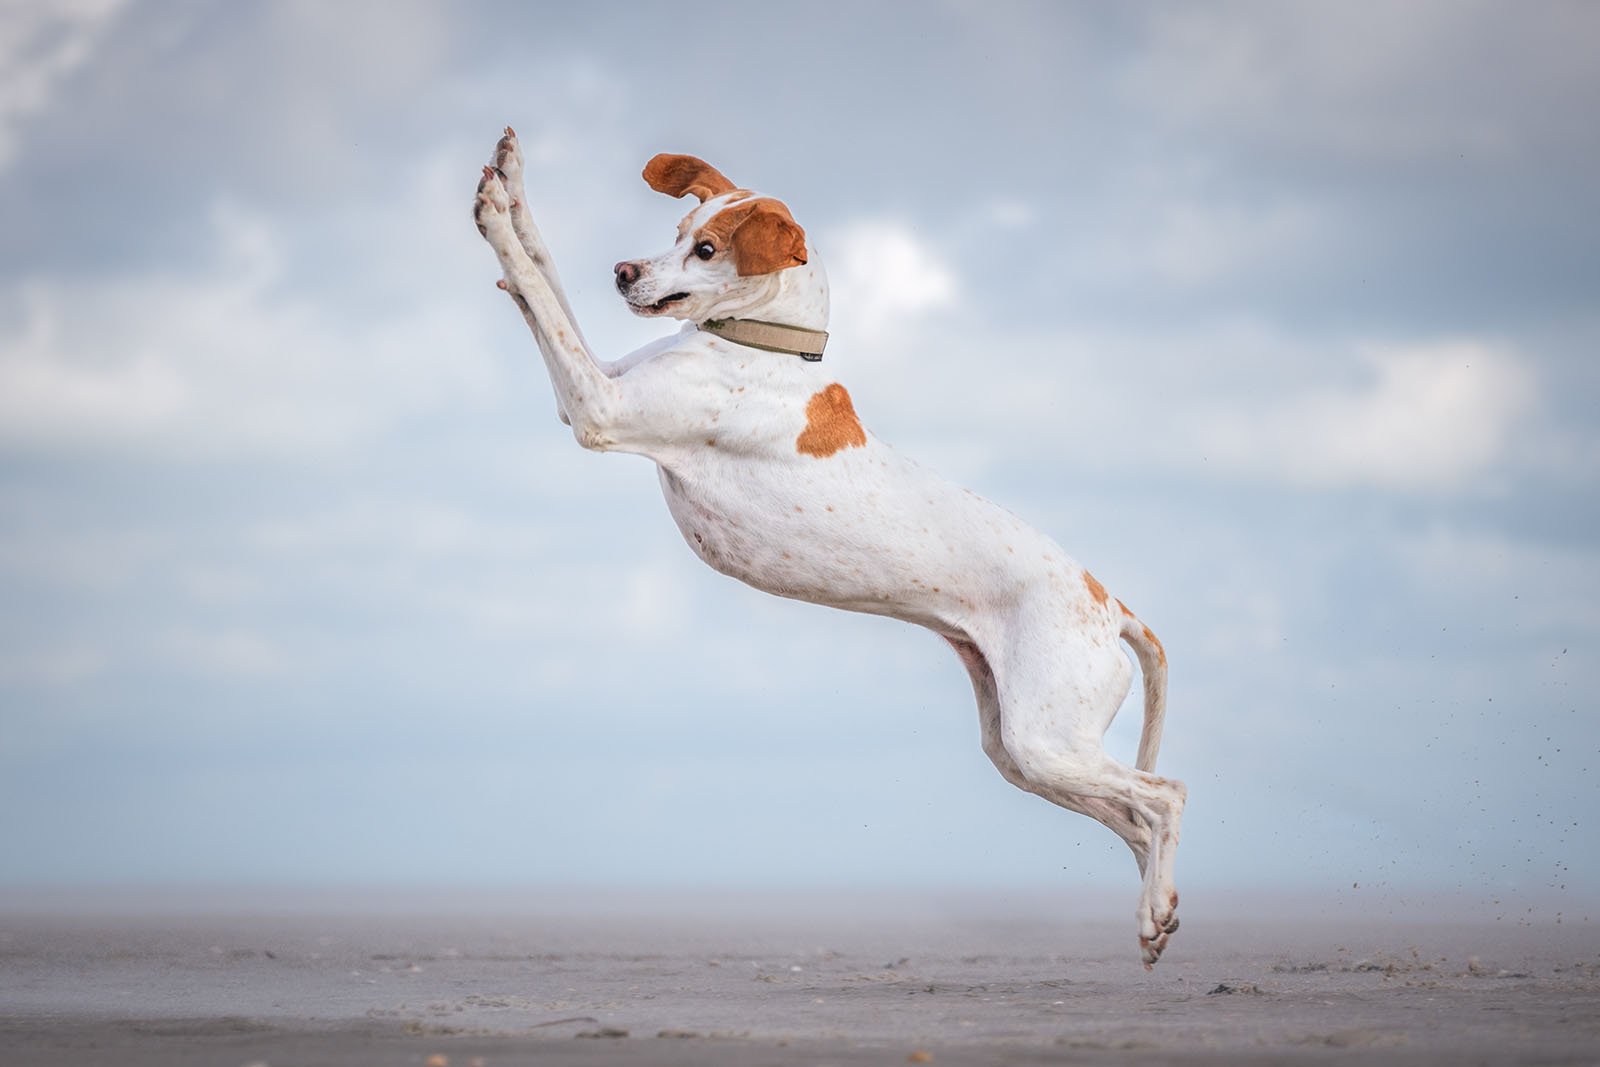 A white and brown dog with a collar is captured mid-air as it jumps with all its legs extended, against a cloudy sky backdrop. The dog appears energetic and joyful, with a sandy ground beneath it.